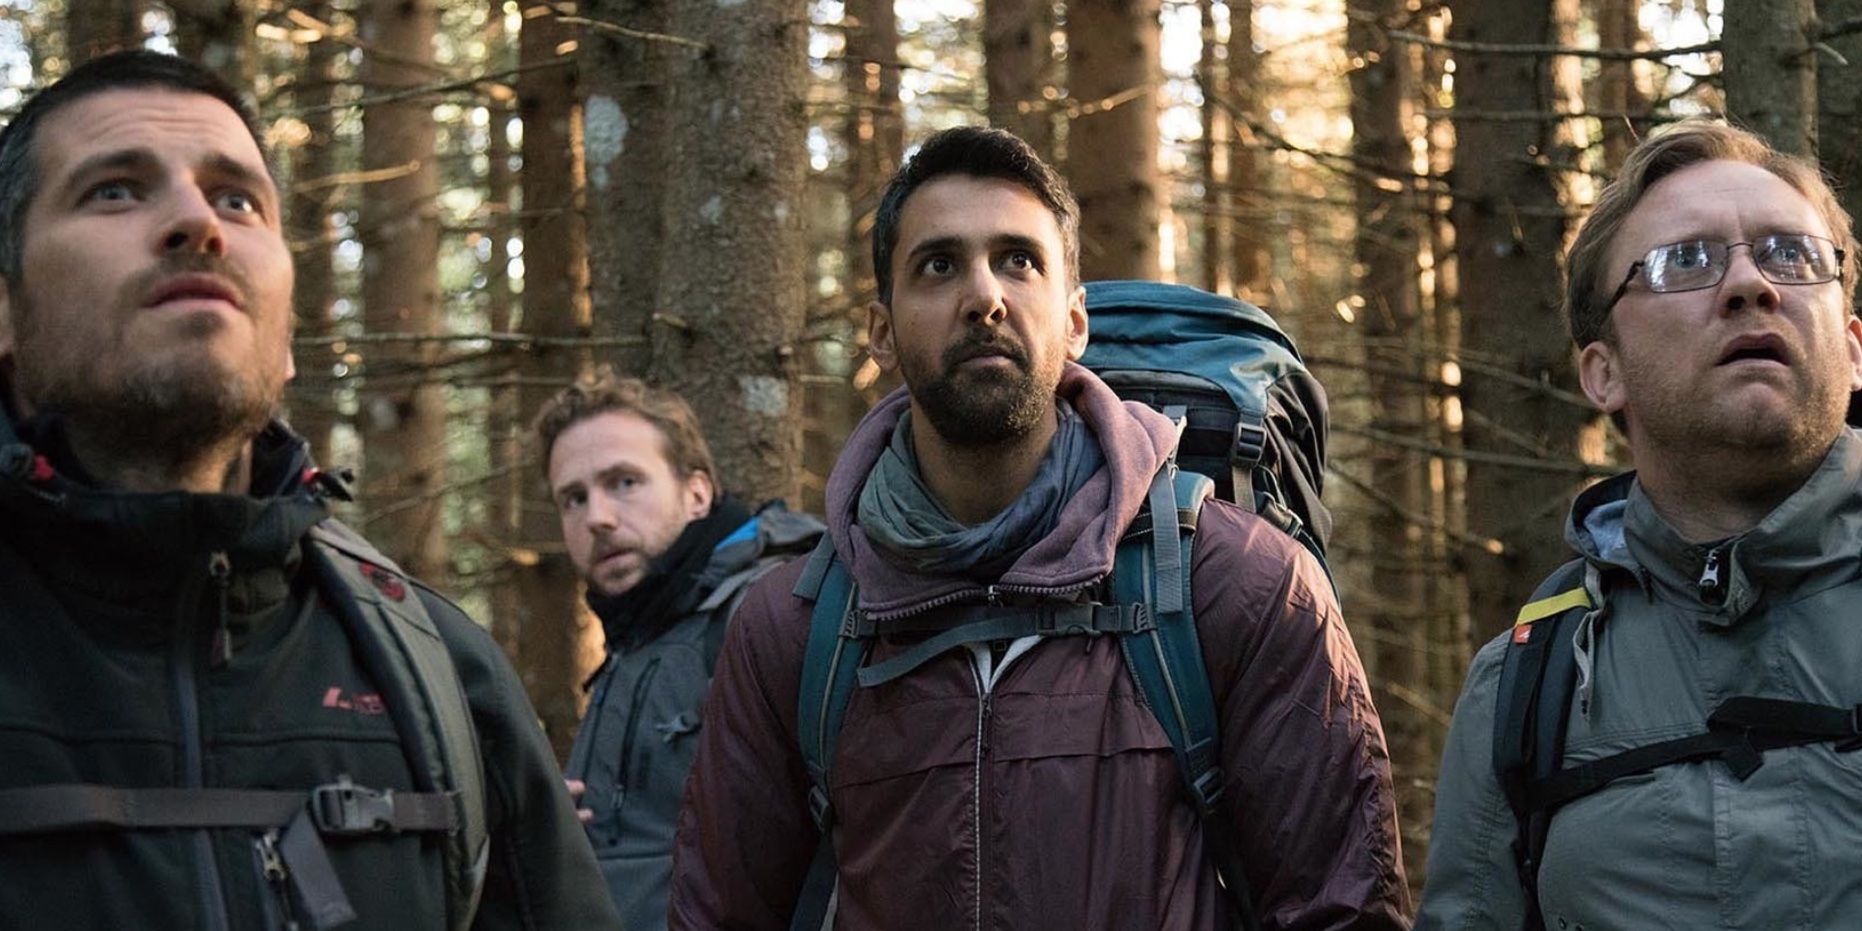 Sam Troughton, Rafe Spall, Robert James-Collier and Arsher Ali in 'The Ritual'